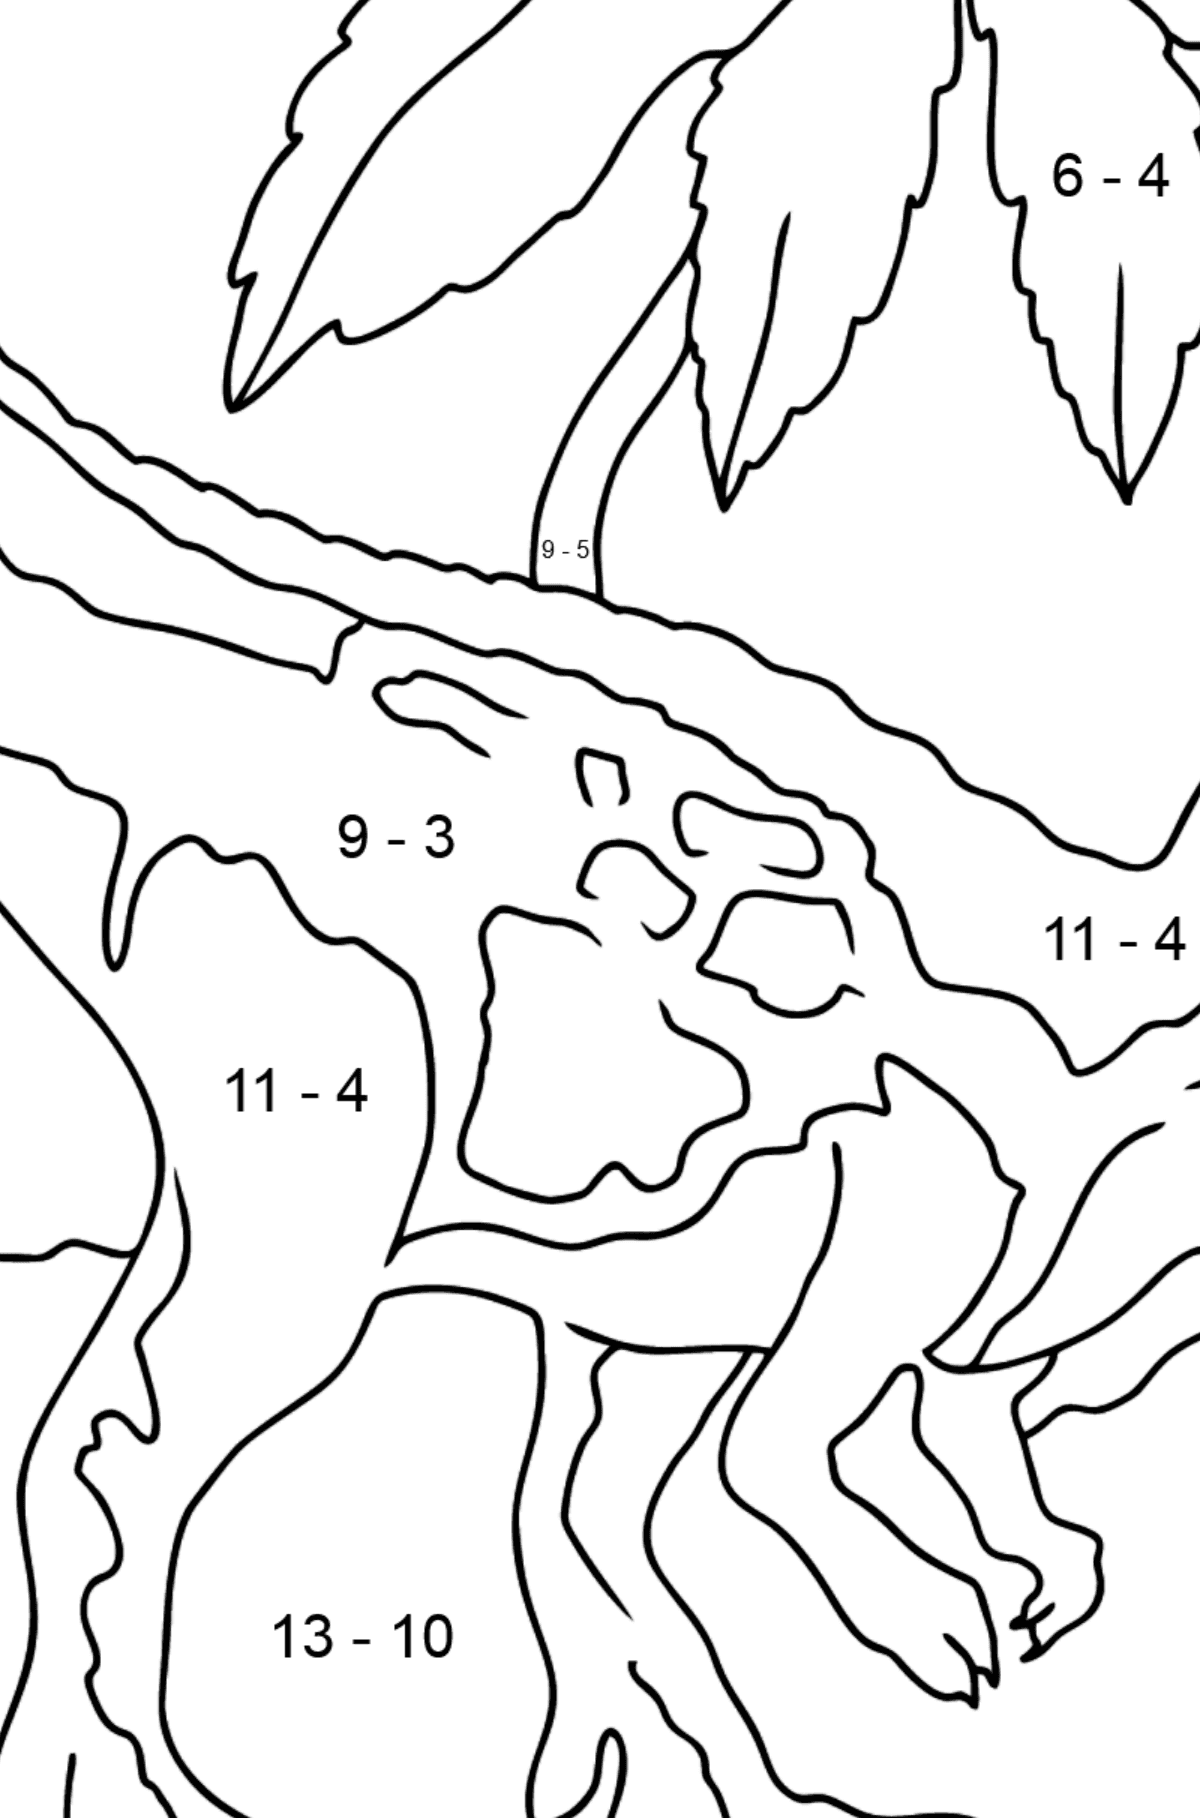 Coloring Page - Tyrannosaurus - The Best Hunter Among Dinosaurs - Math Coloring - Subtraction for Kids